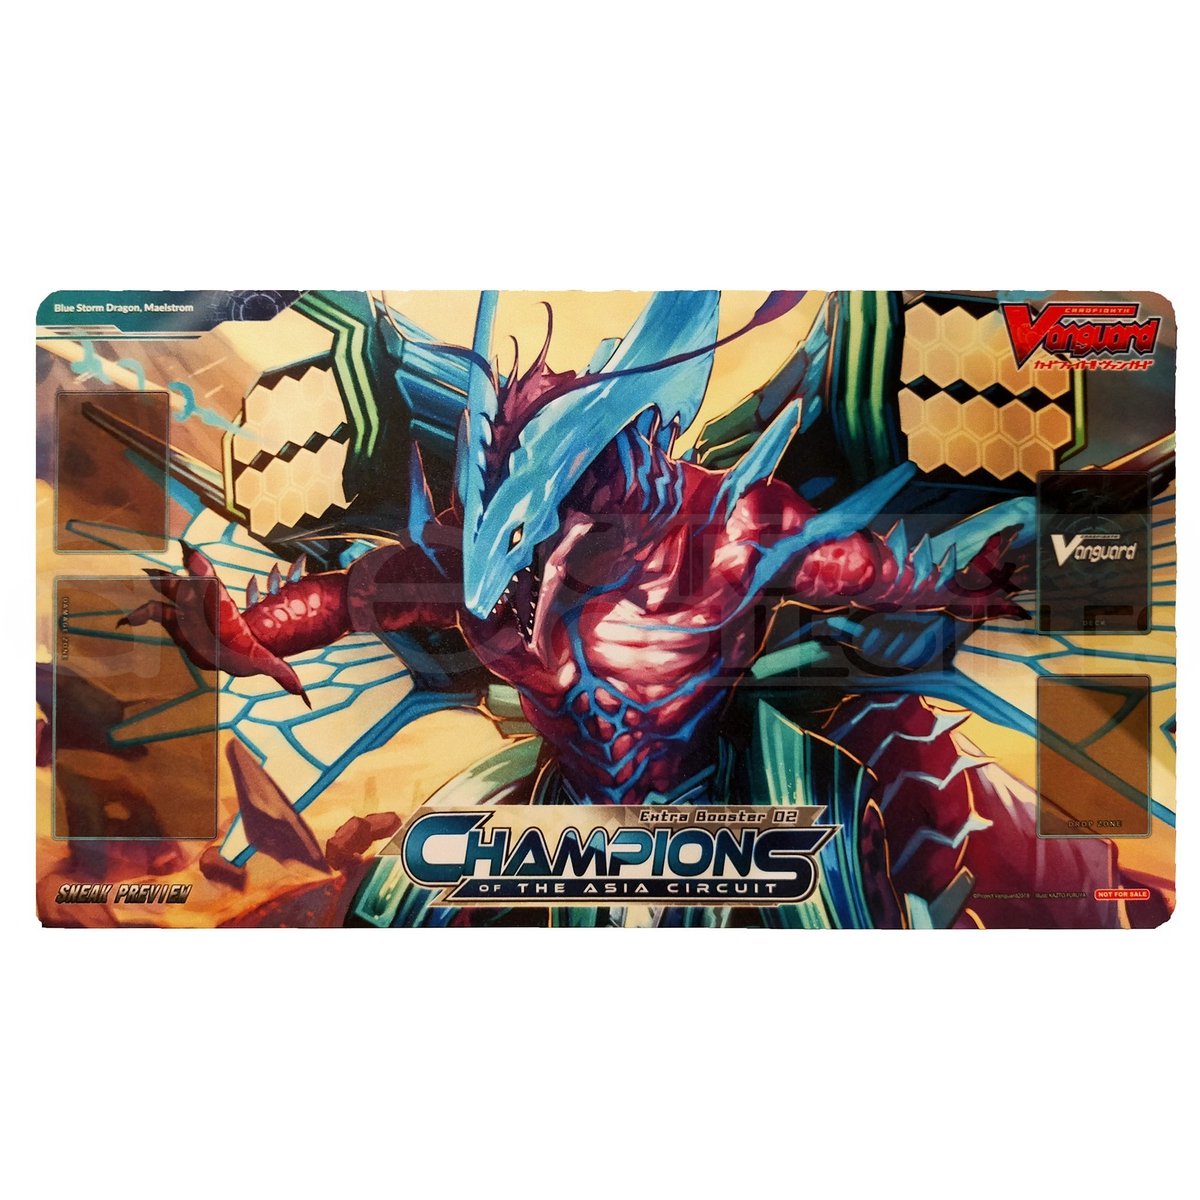 Cardfight Vanguard Playmat "Blue Storm Dragon, Maelstrom" (VG-V-EB02)-Bushiroad-Ace Cards & Collectibles